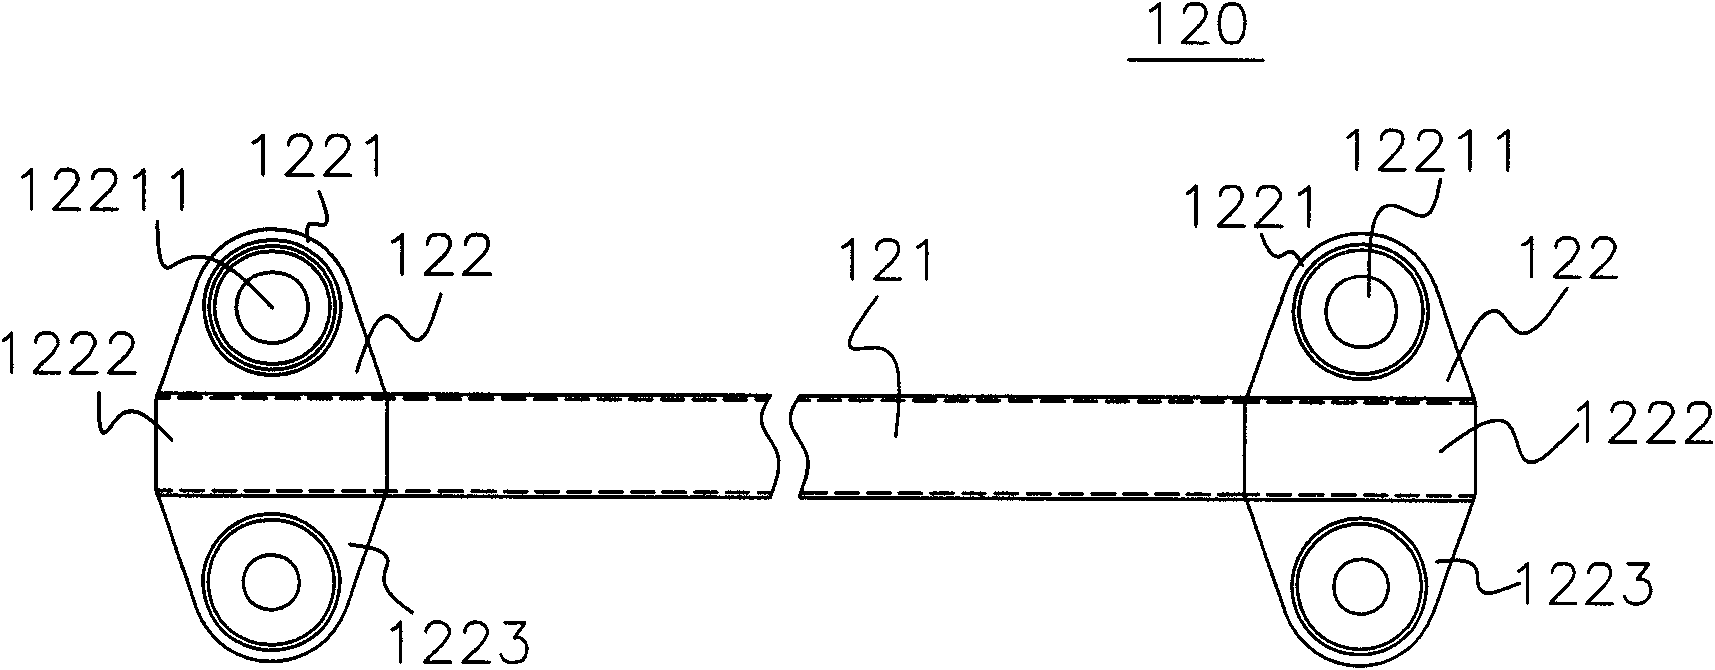 Method for installing combined hoisting beam, combined hoist and oil production platform drilling equipment